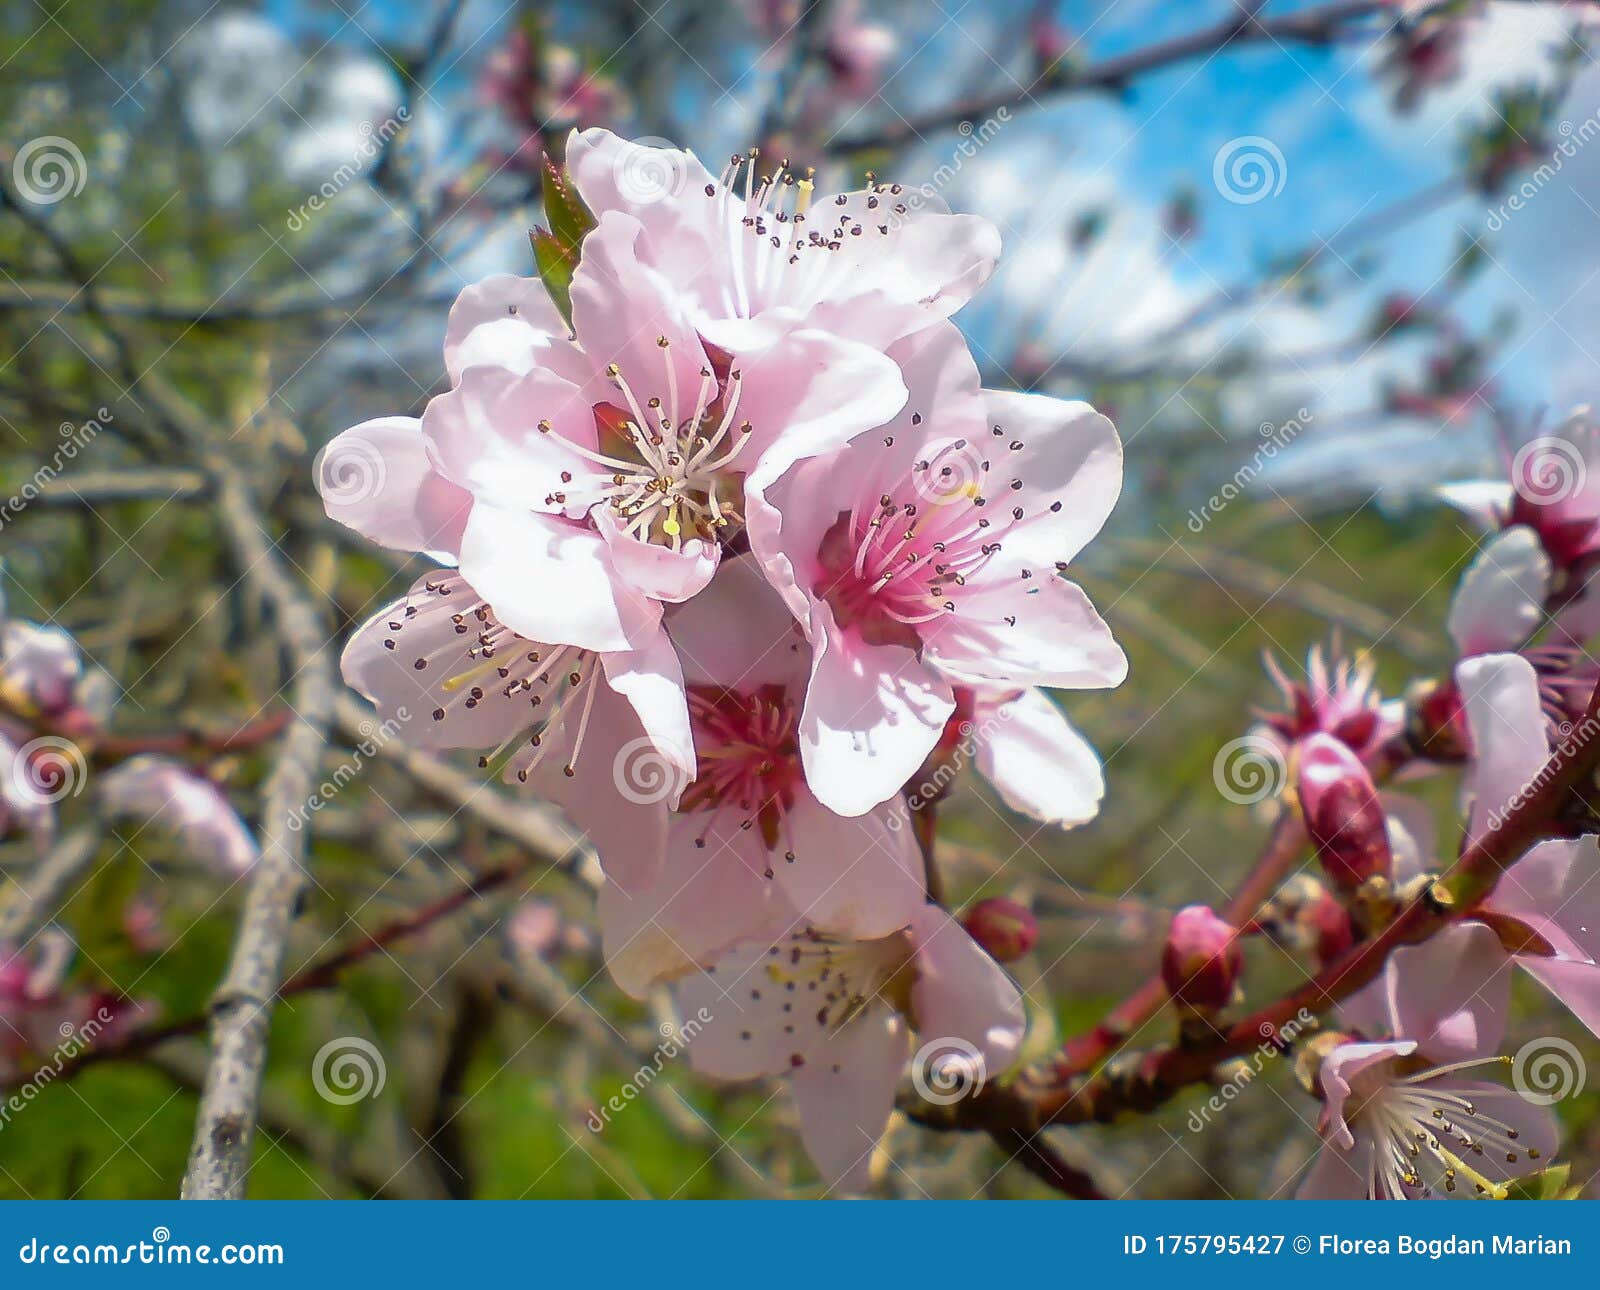 macro cherry blossoms from the carpathian mountains